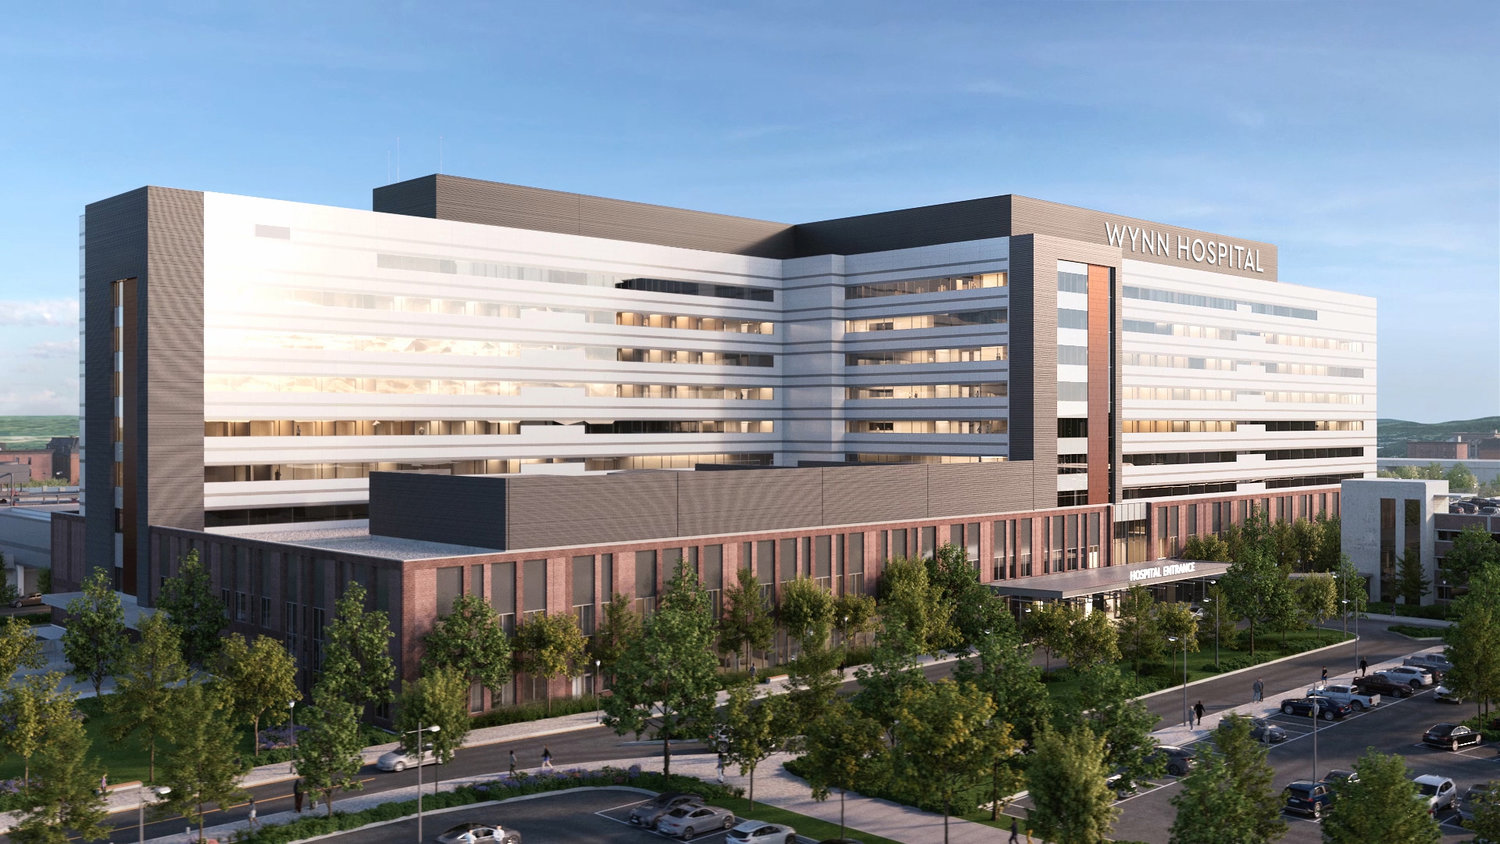 A rendering of what The Wynn Hospital will look like upon completion.